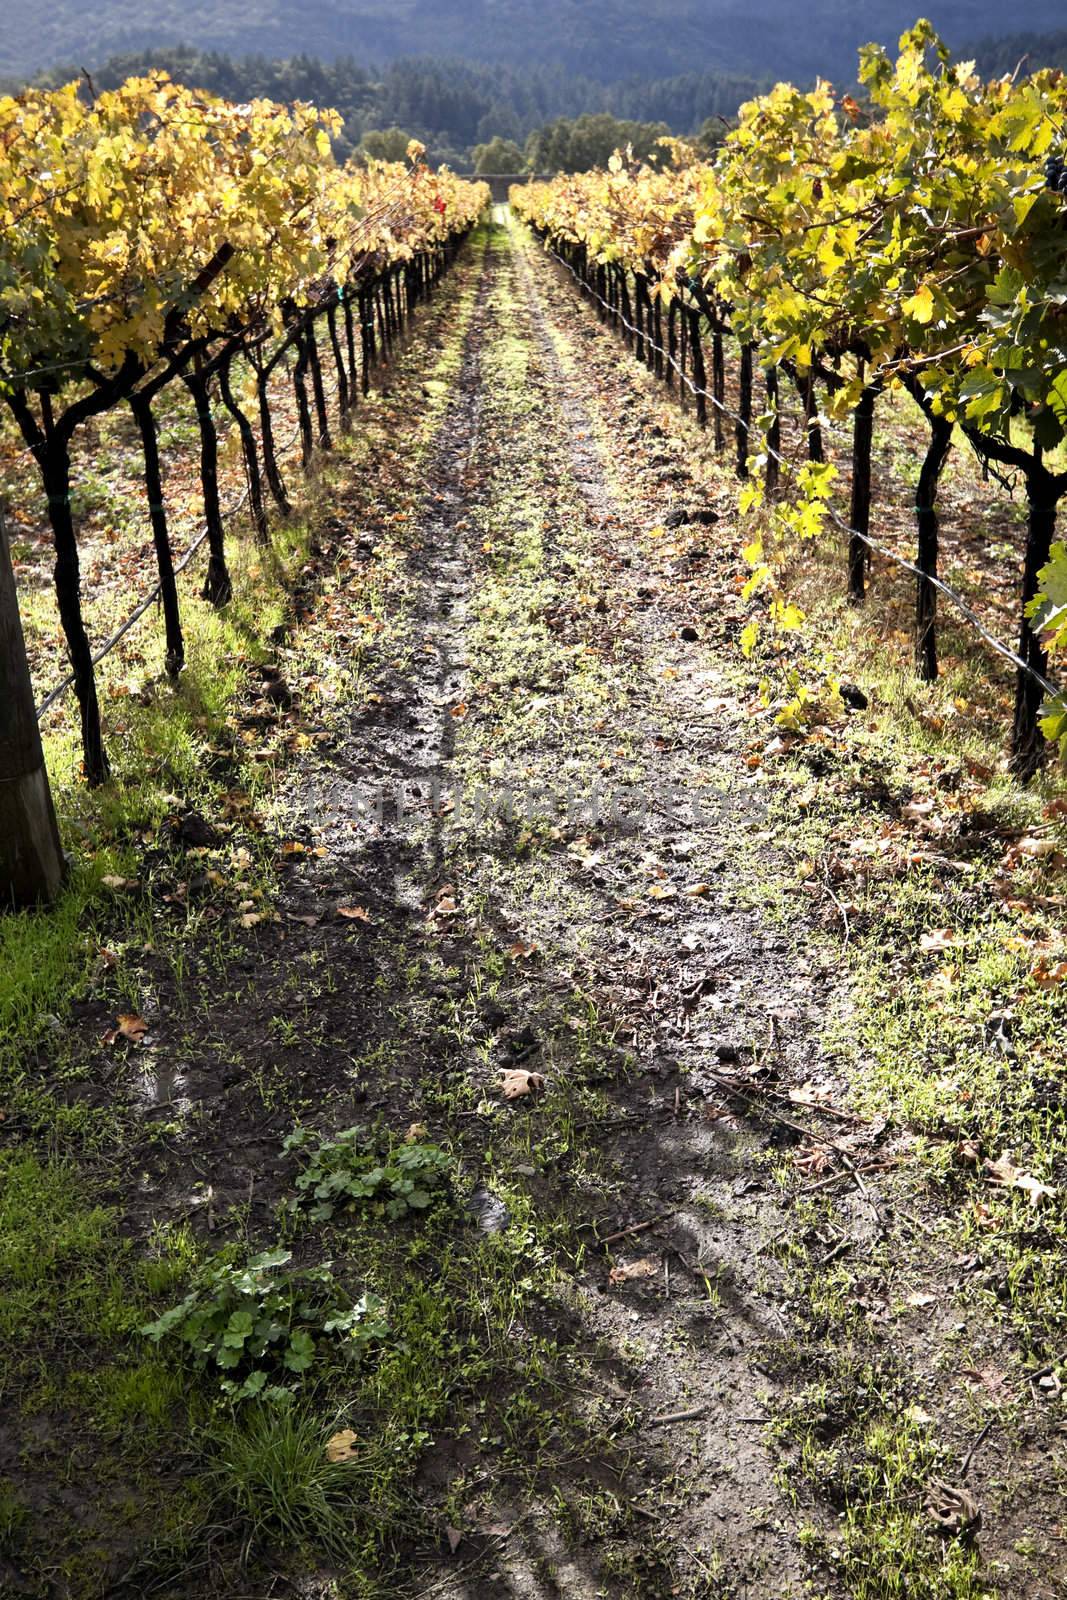 A pathway between two rows of grape vines